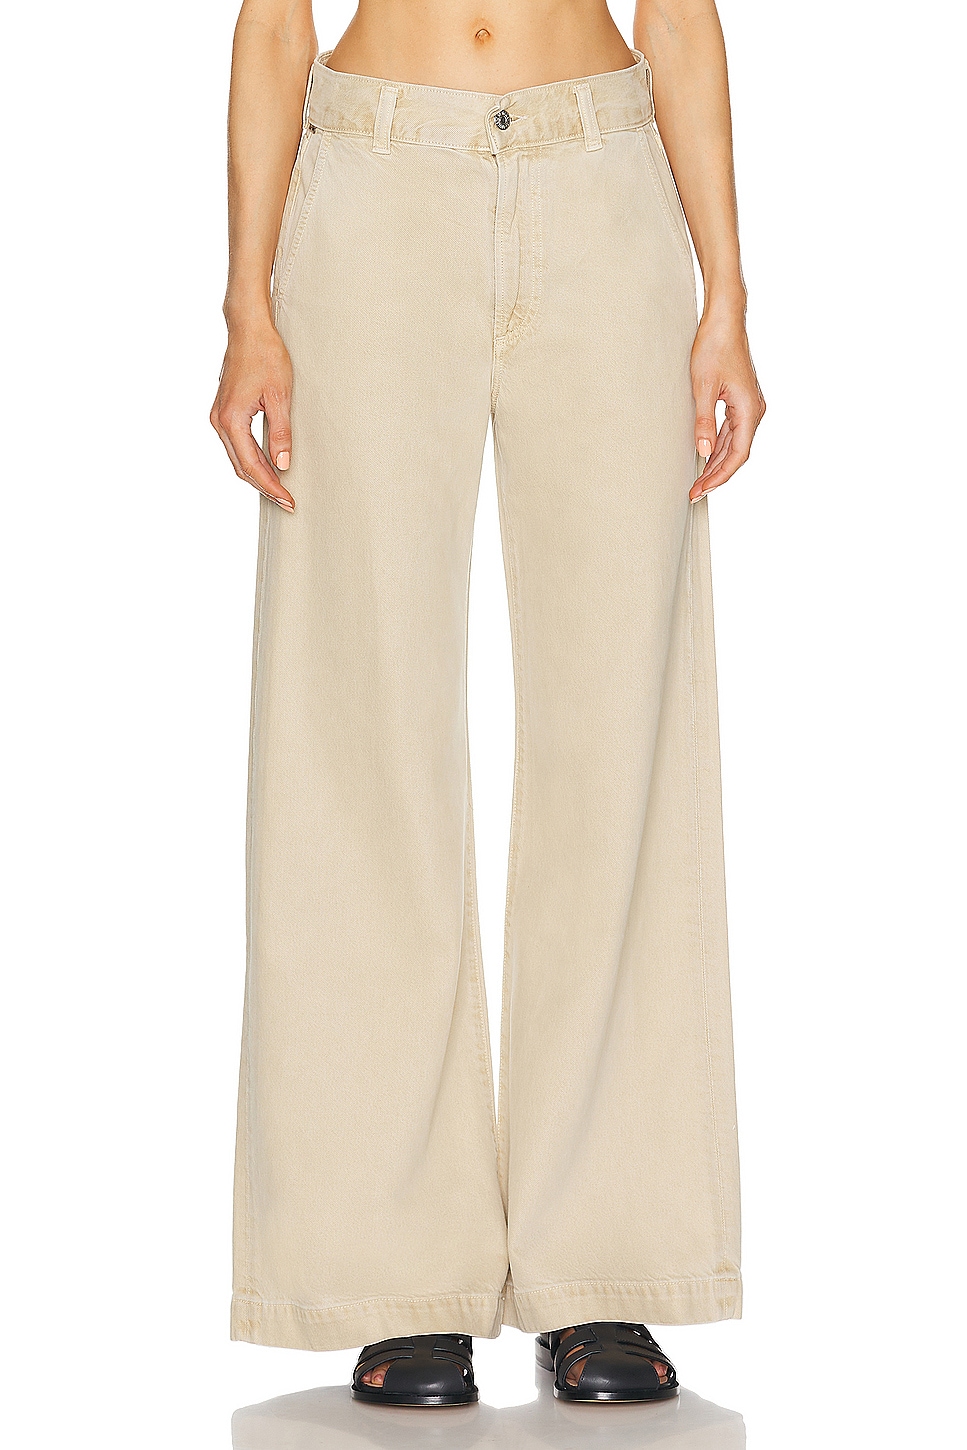 Image 1 of Citizens of Humanity Beverly Trouser in Taos Sand